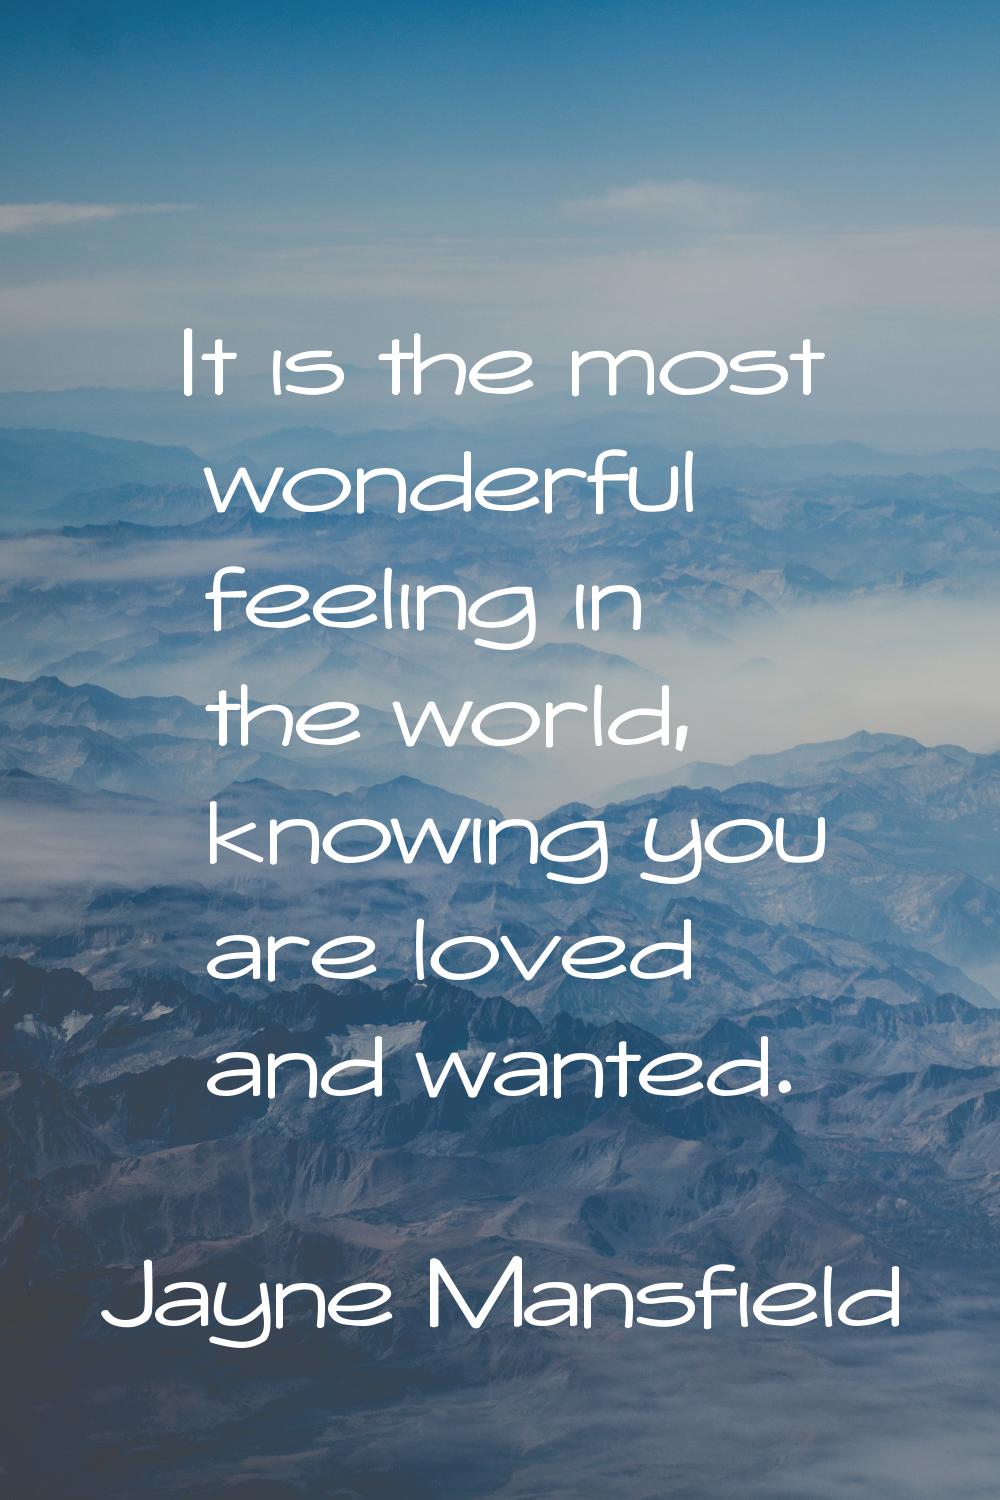 It is the most wonderful feeling in the world, knowing you are loved and wanted.